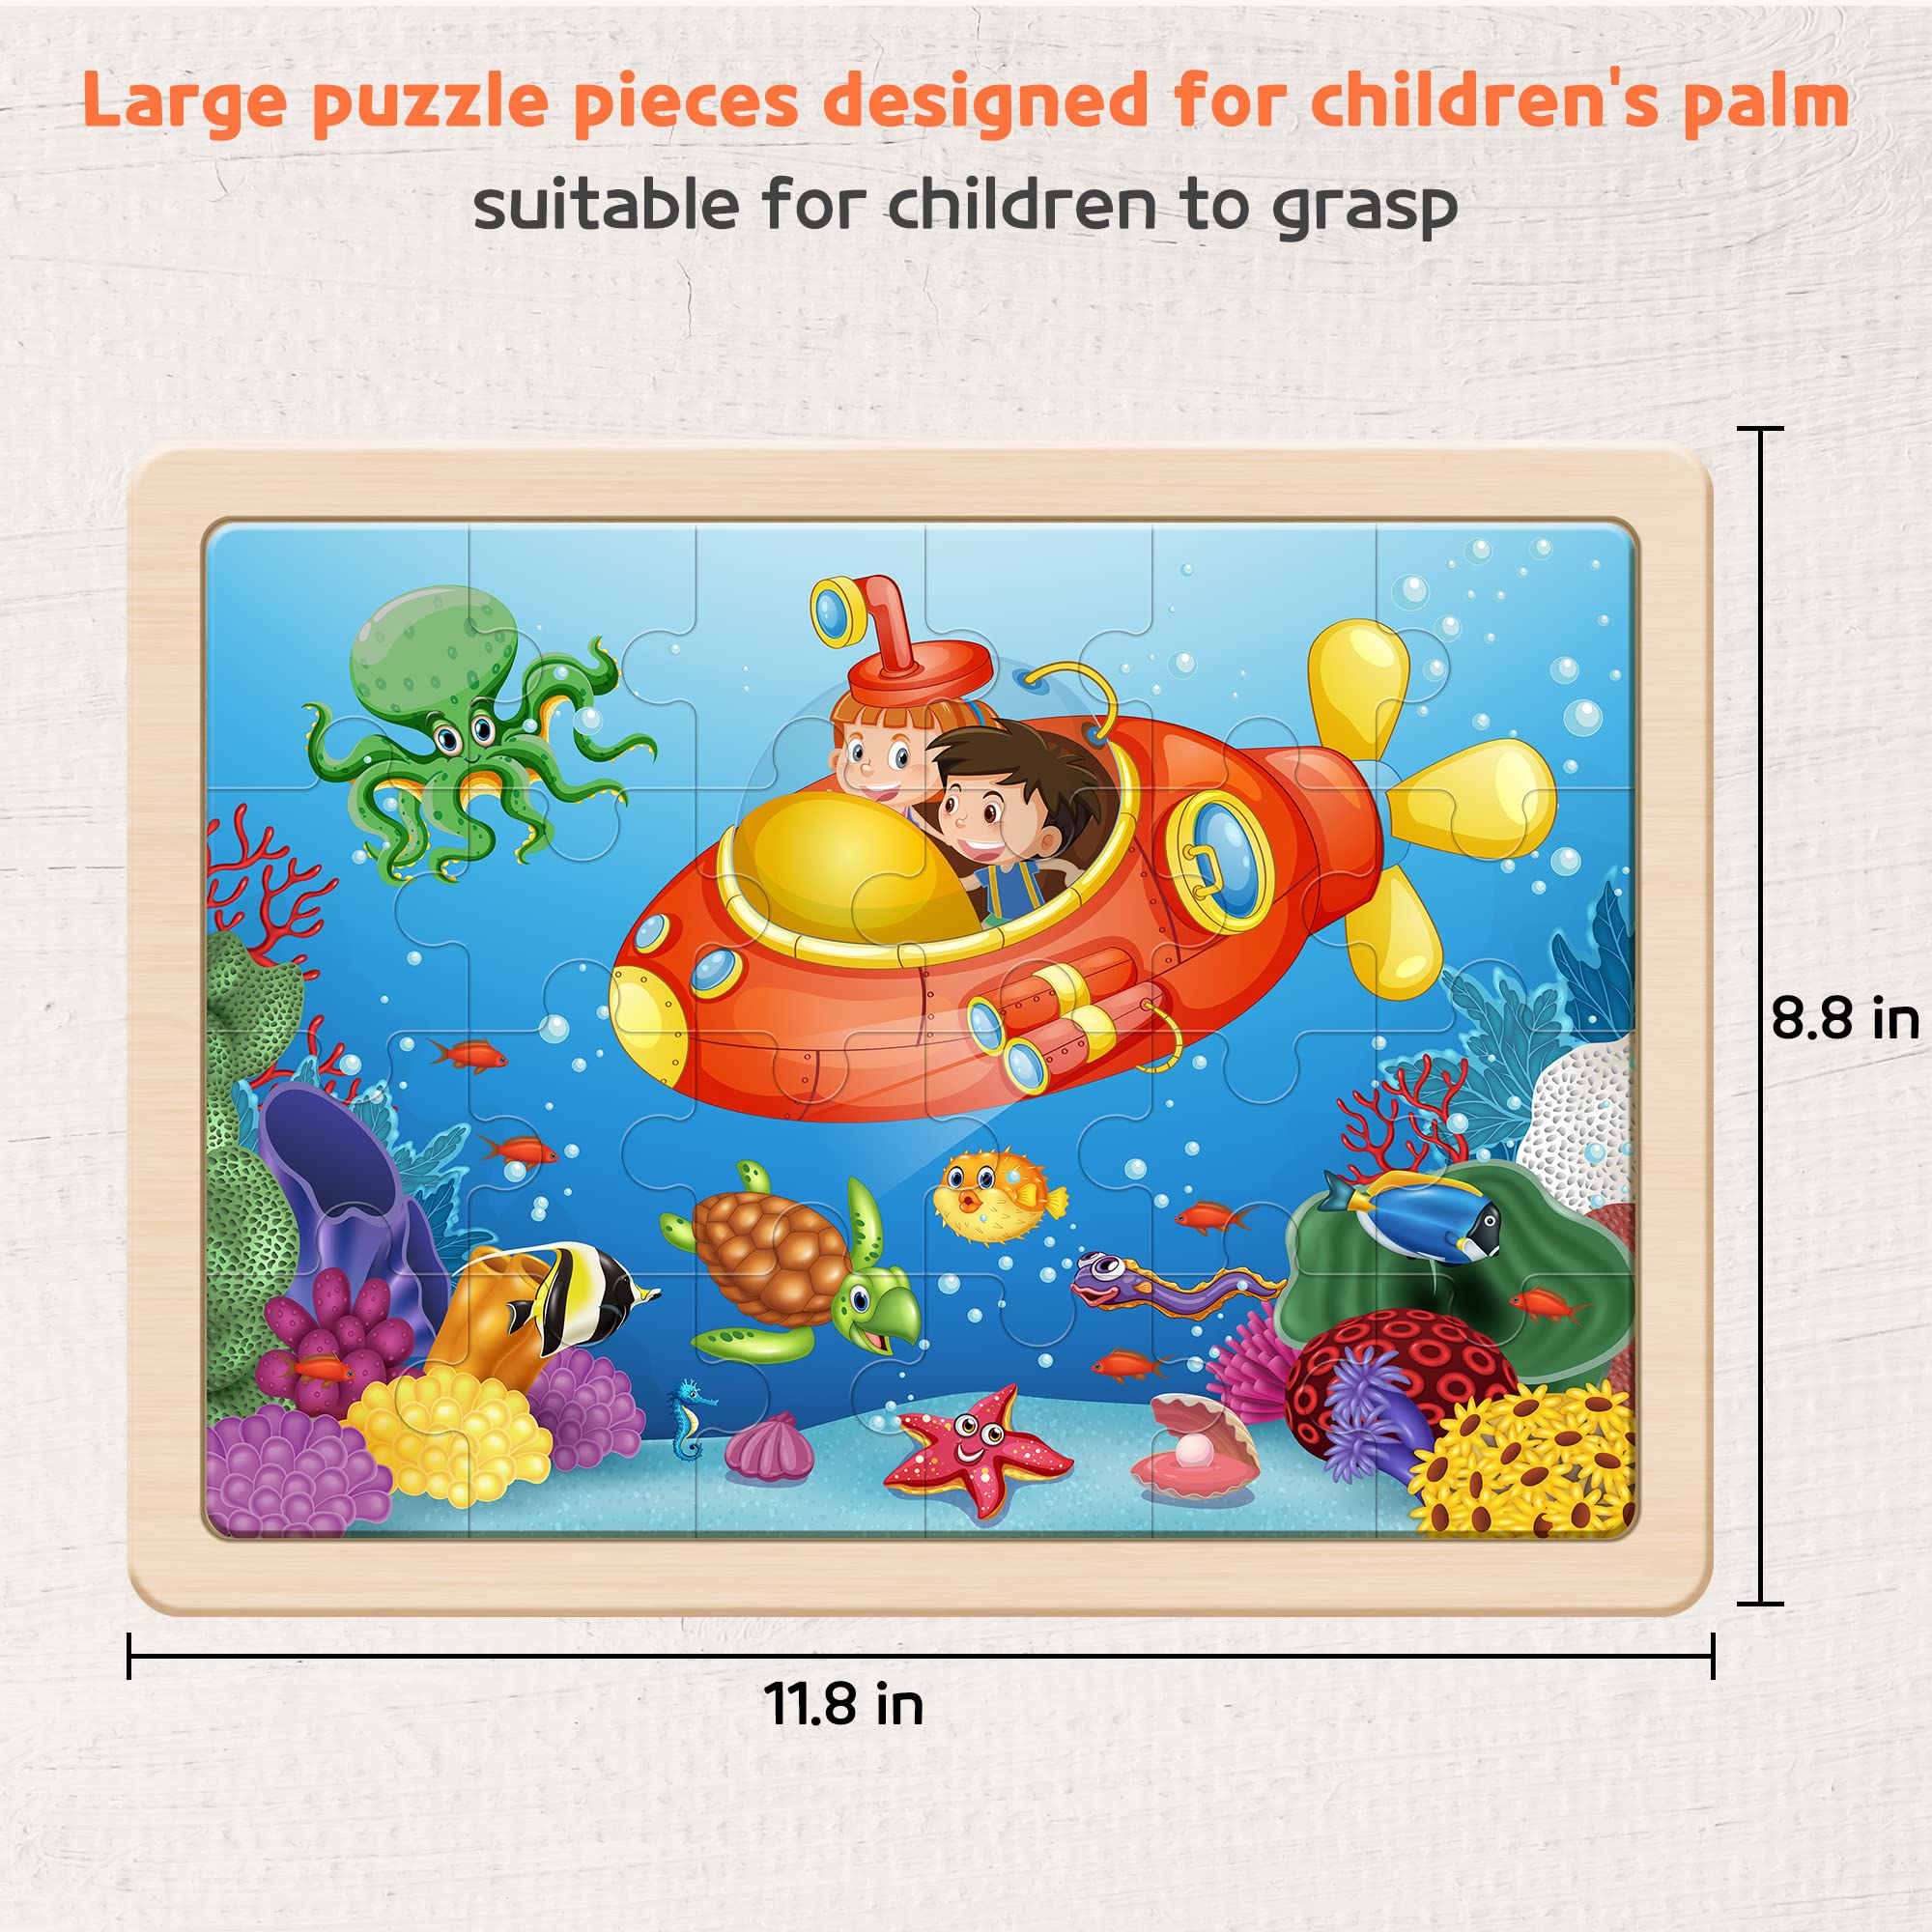 SYNARRY Wooden Puzzles for Kids Ages 3-5, 4 Packs 24 PCs Wood Jigsaw Puzzles Preschool Educational Brain Teaser Boards Toys, Zoo Farm Insect Sea Animals, Children Gifts for 3 4 5 6 Year Old Boys Girls